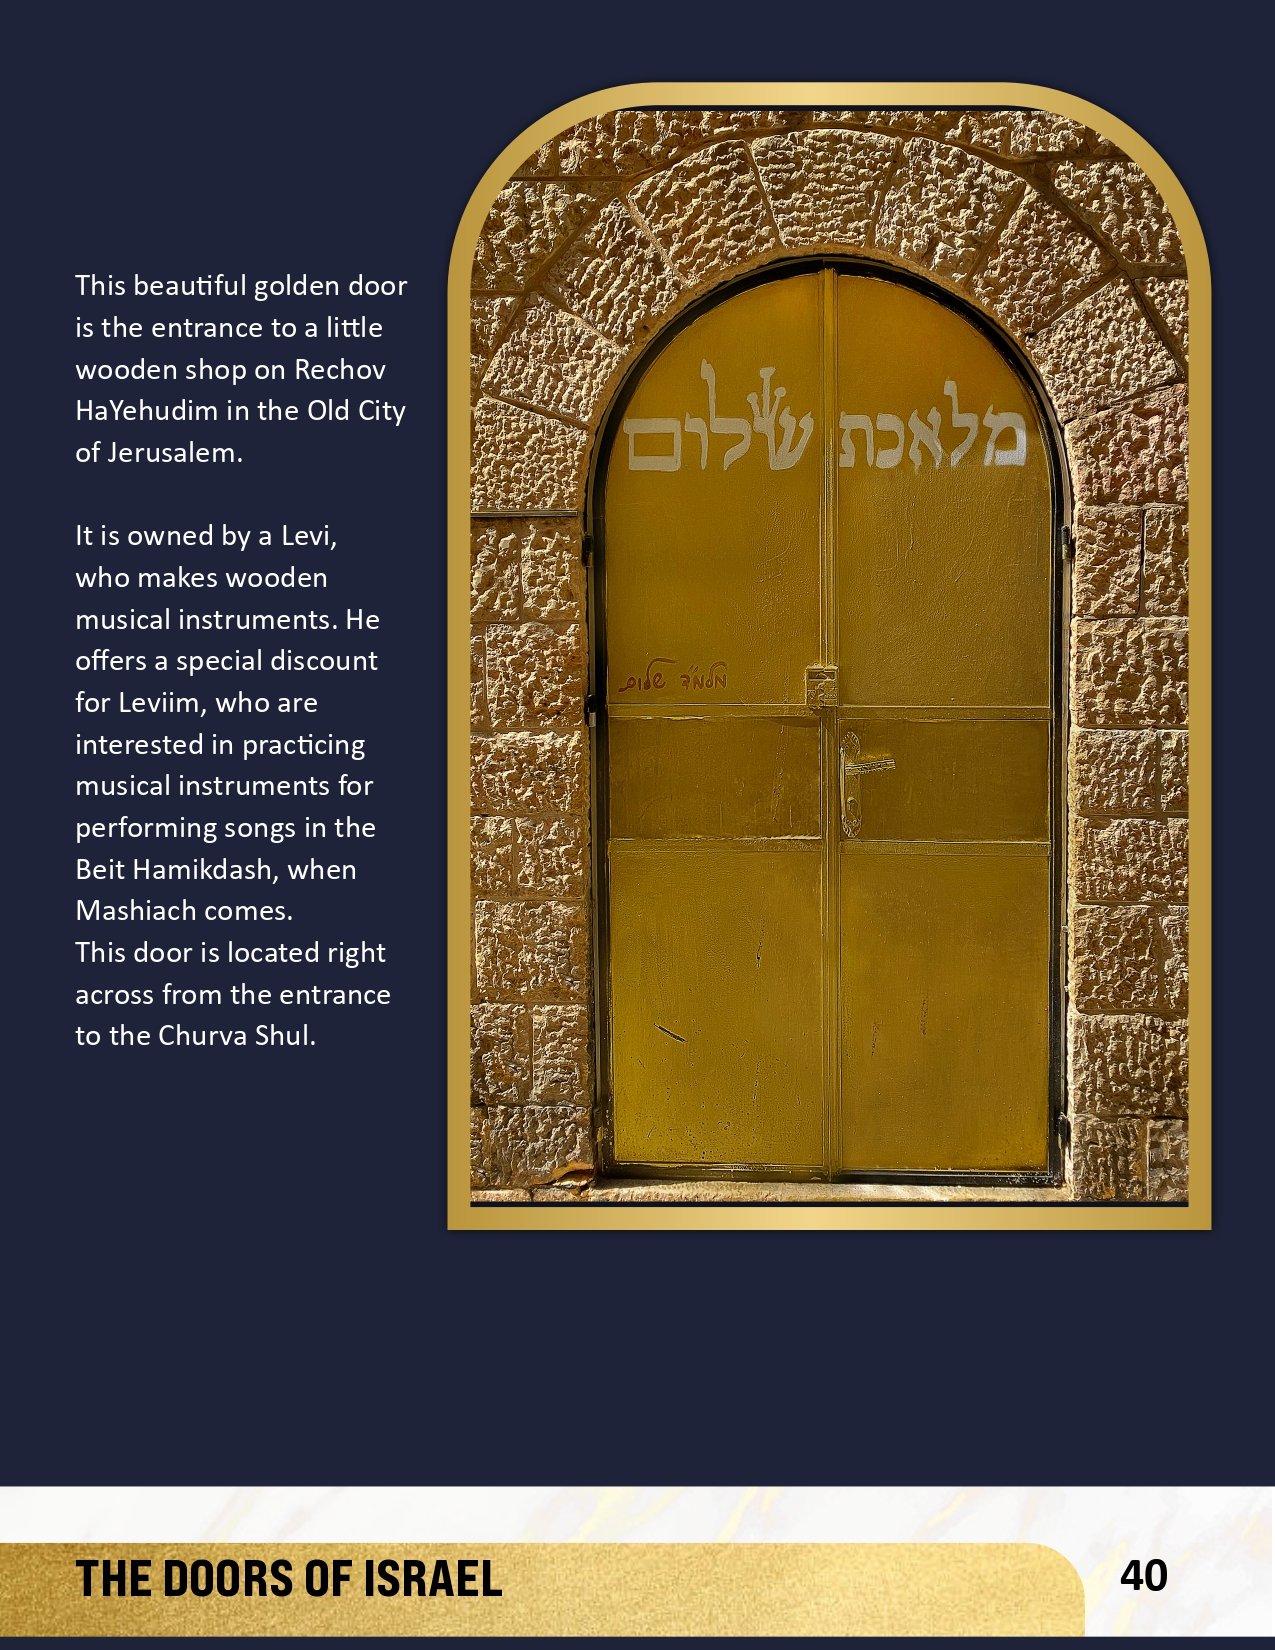 THE DOORS OF ISRAEL-6 INSIDE TEXT-40_page-0001.jpg